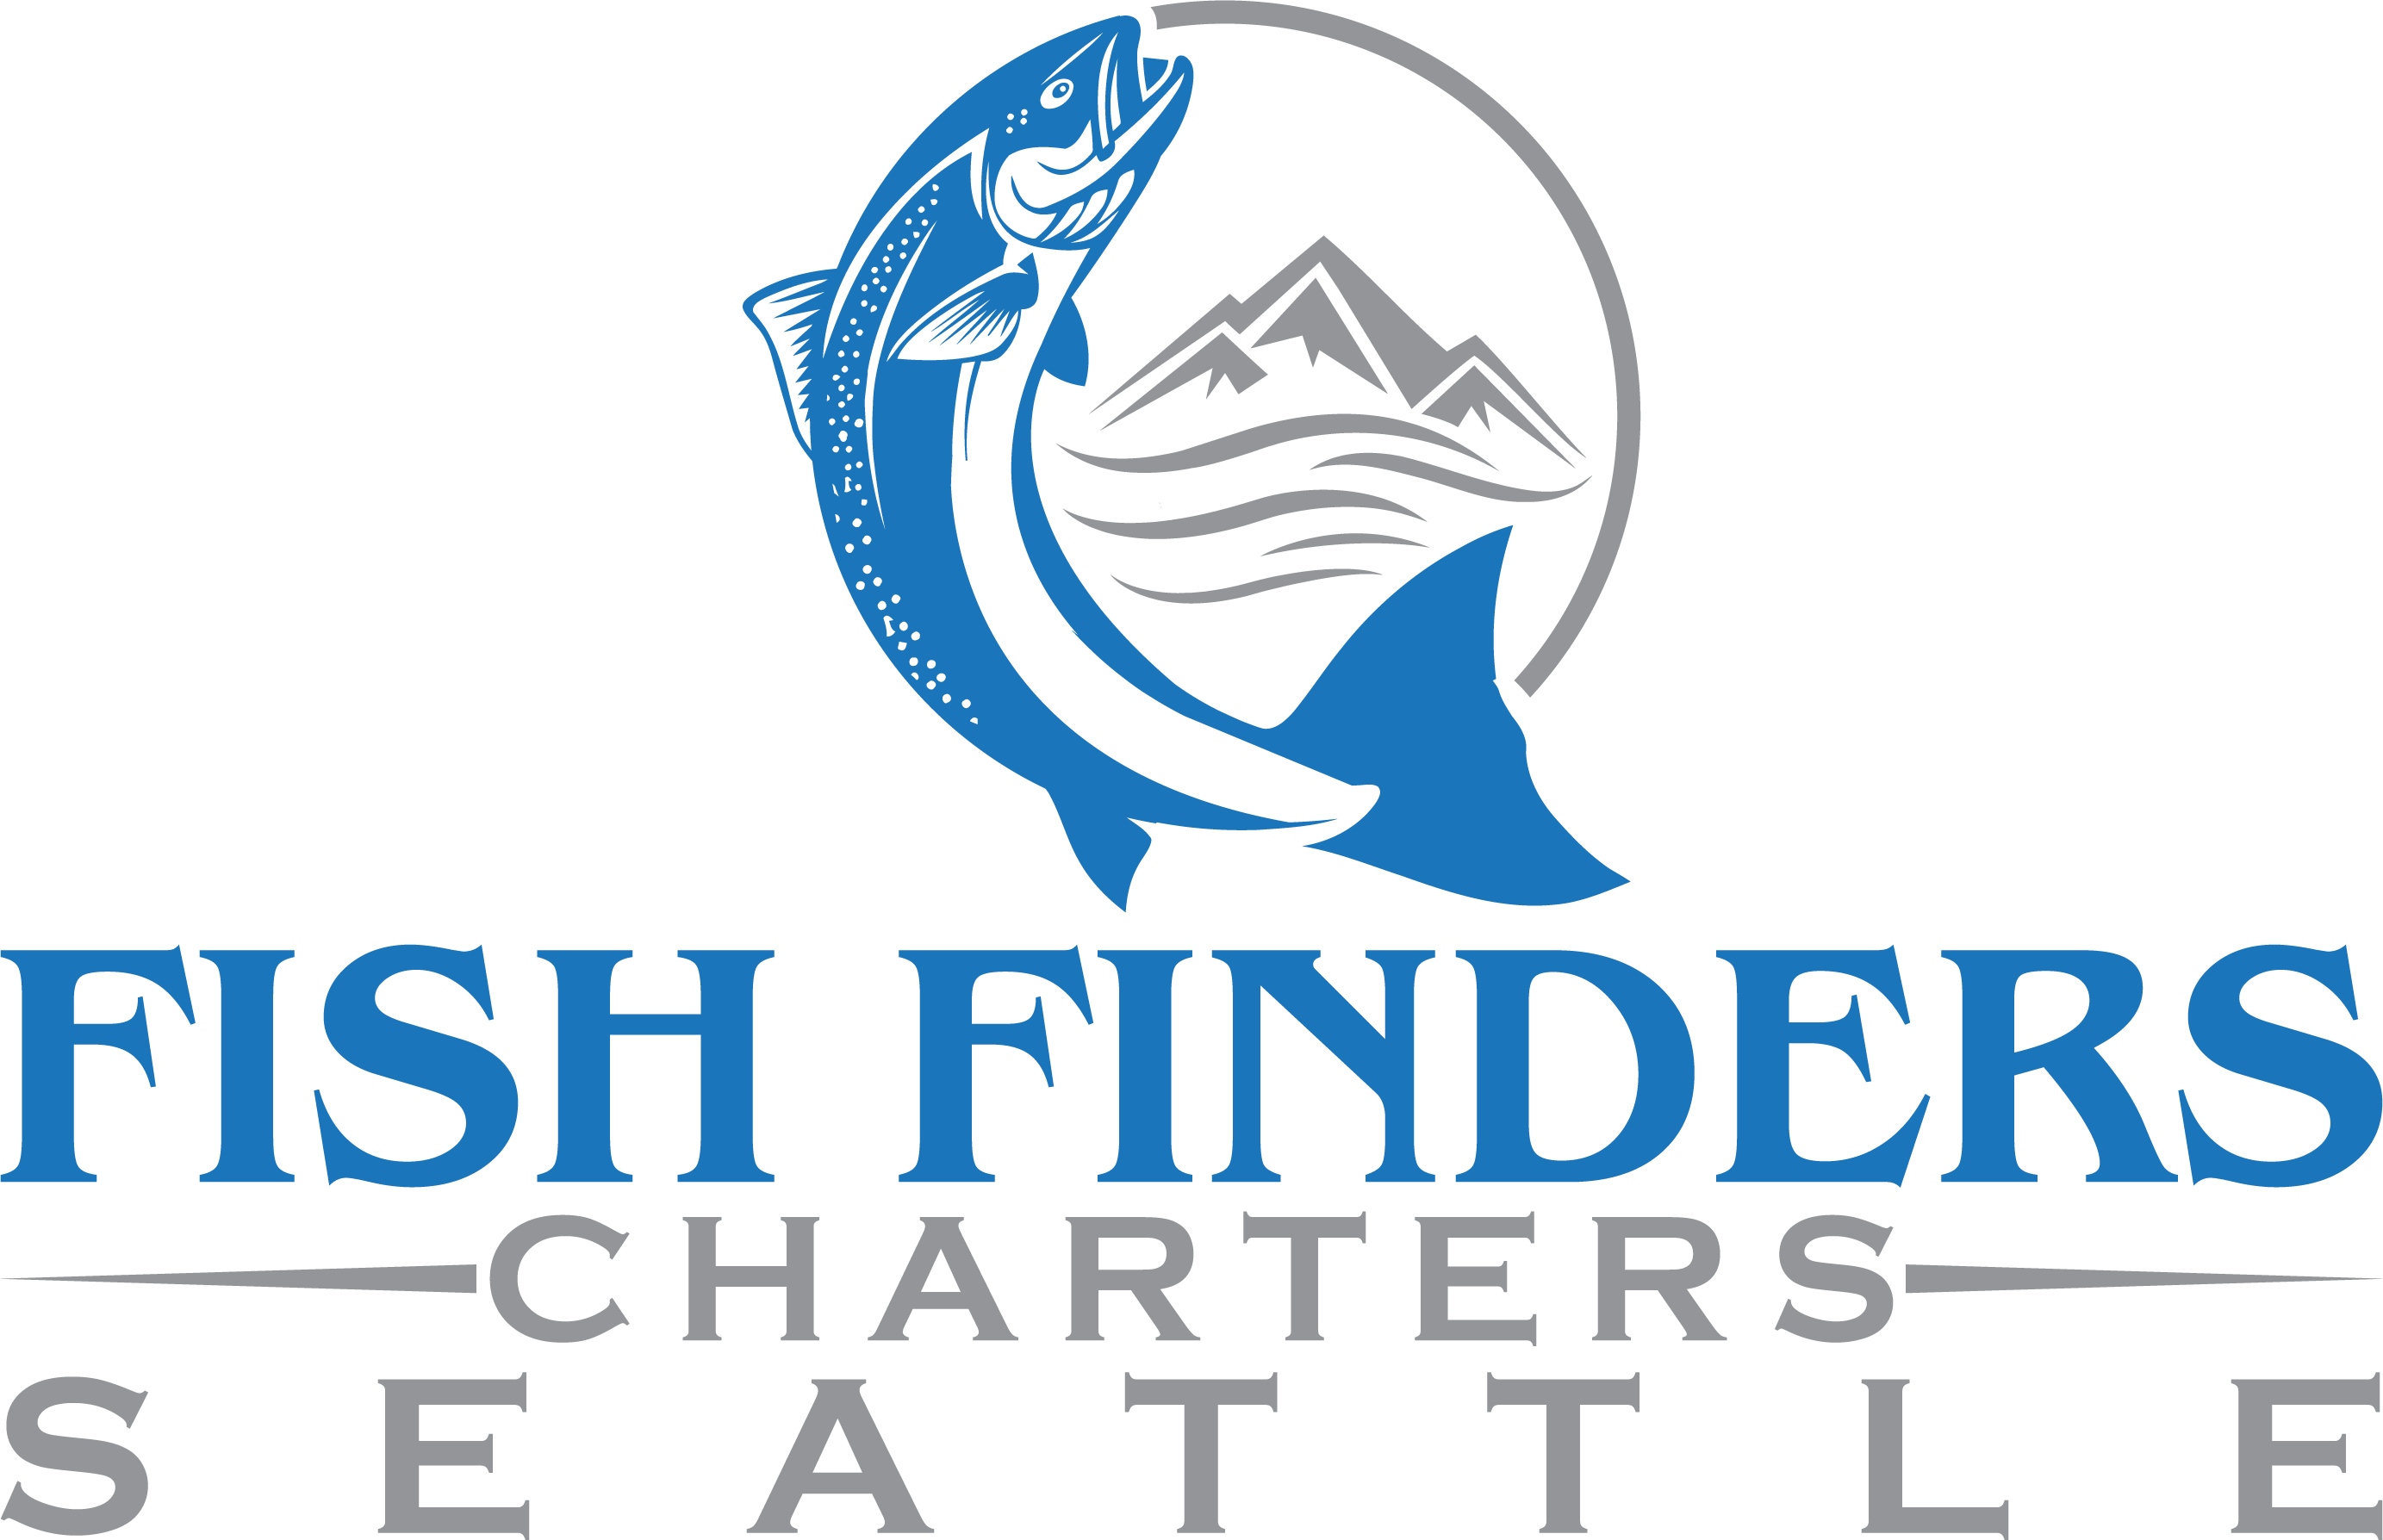 Fish Finders Private Charters